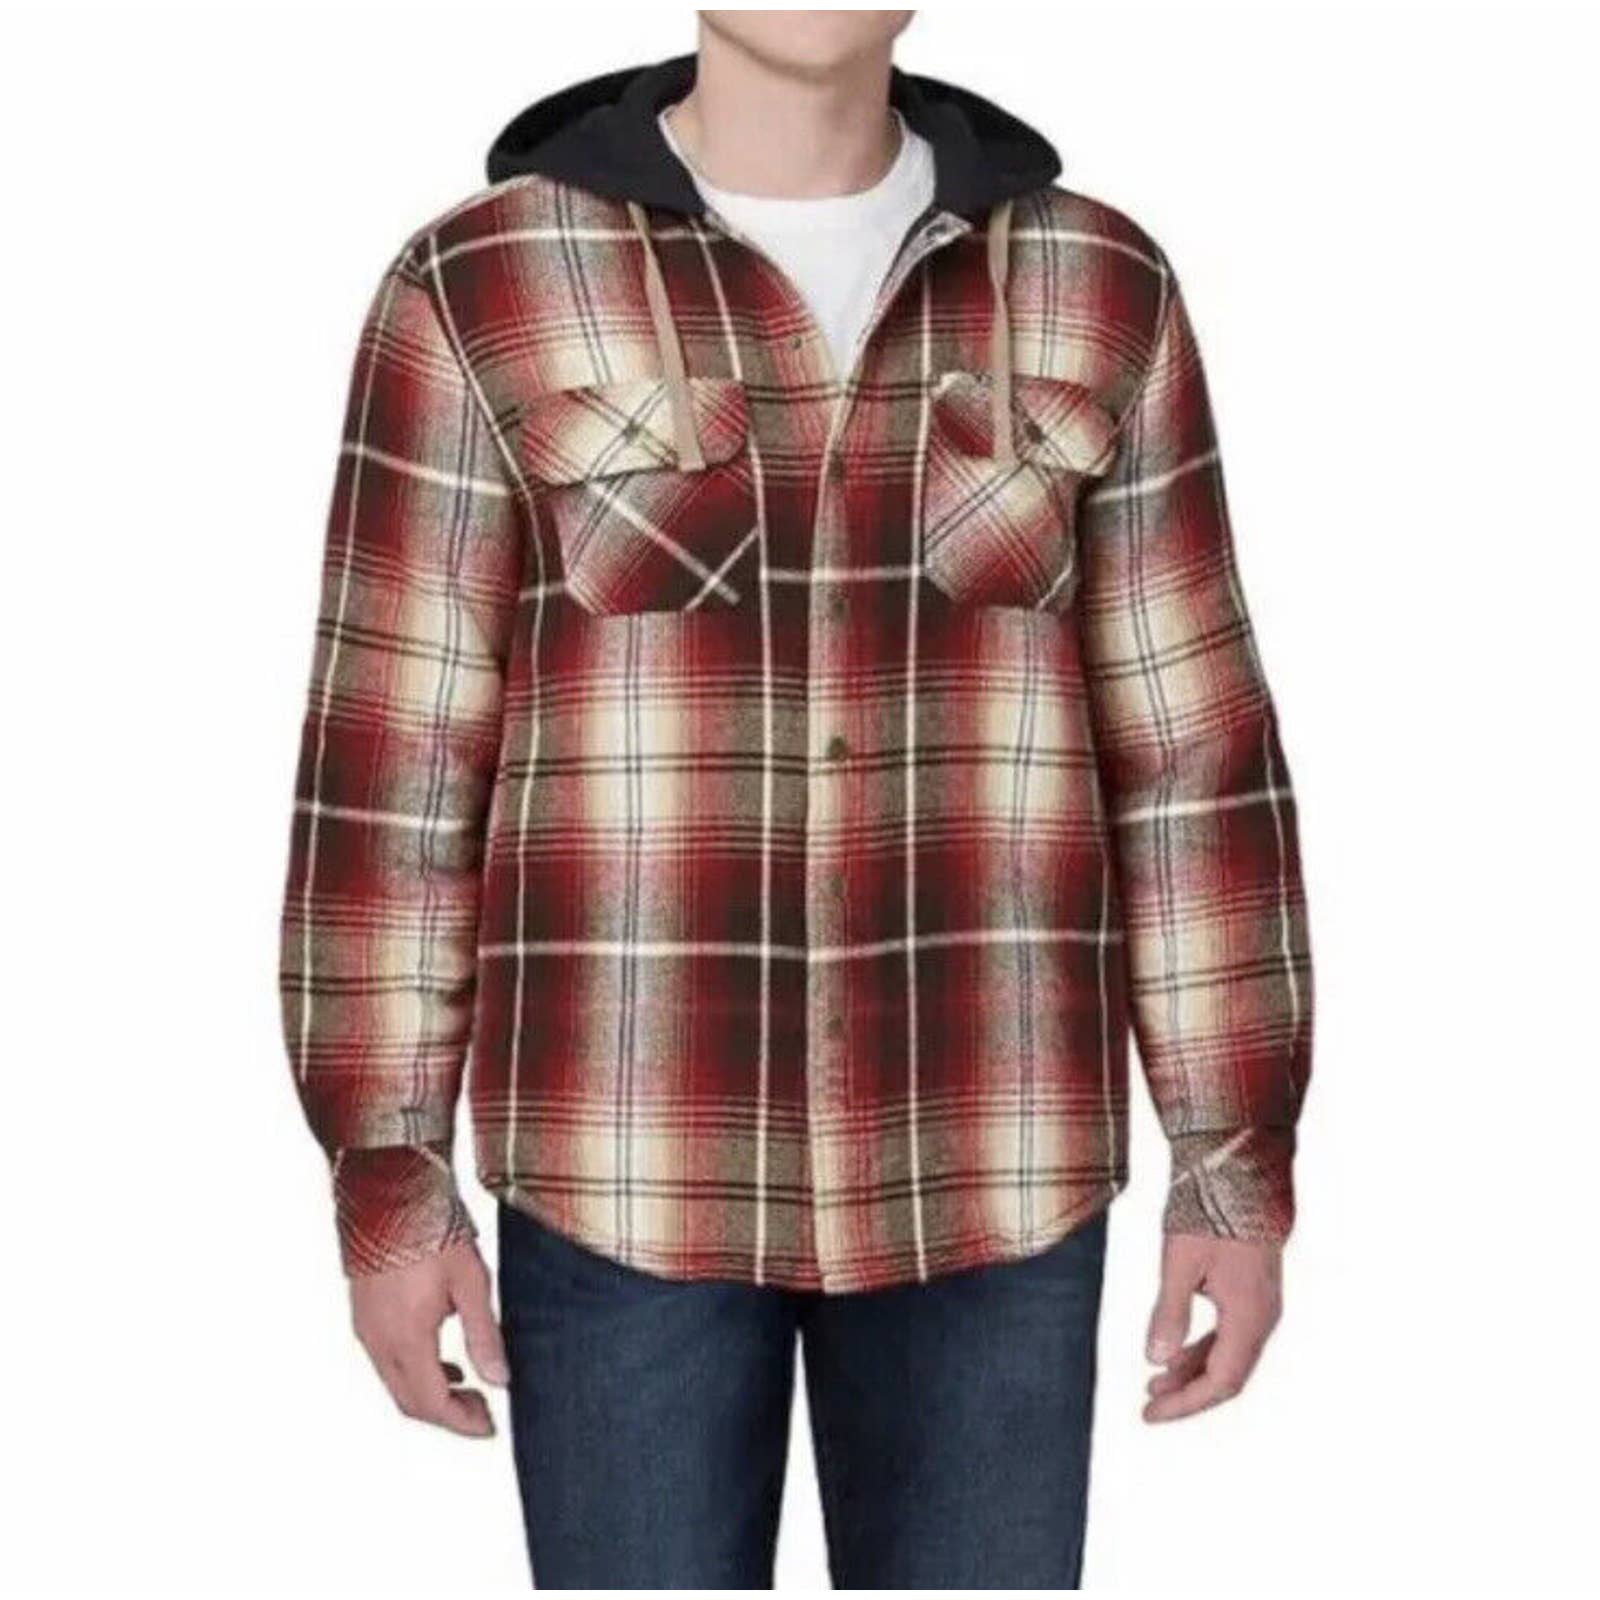 Legendary Outfitters Flannel Shirt Jacket Mens Medium Hooded Snap Buttons Plaid